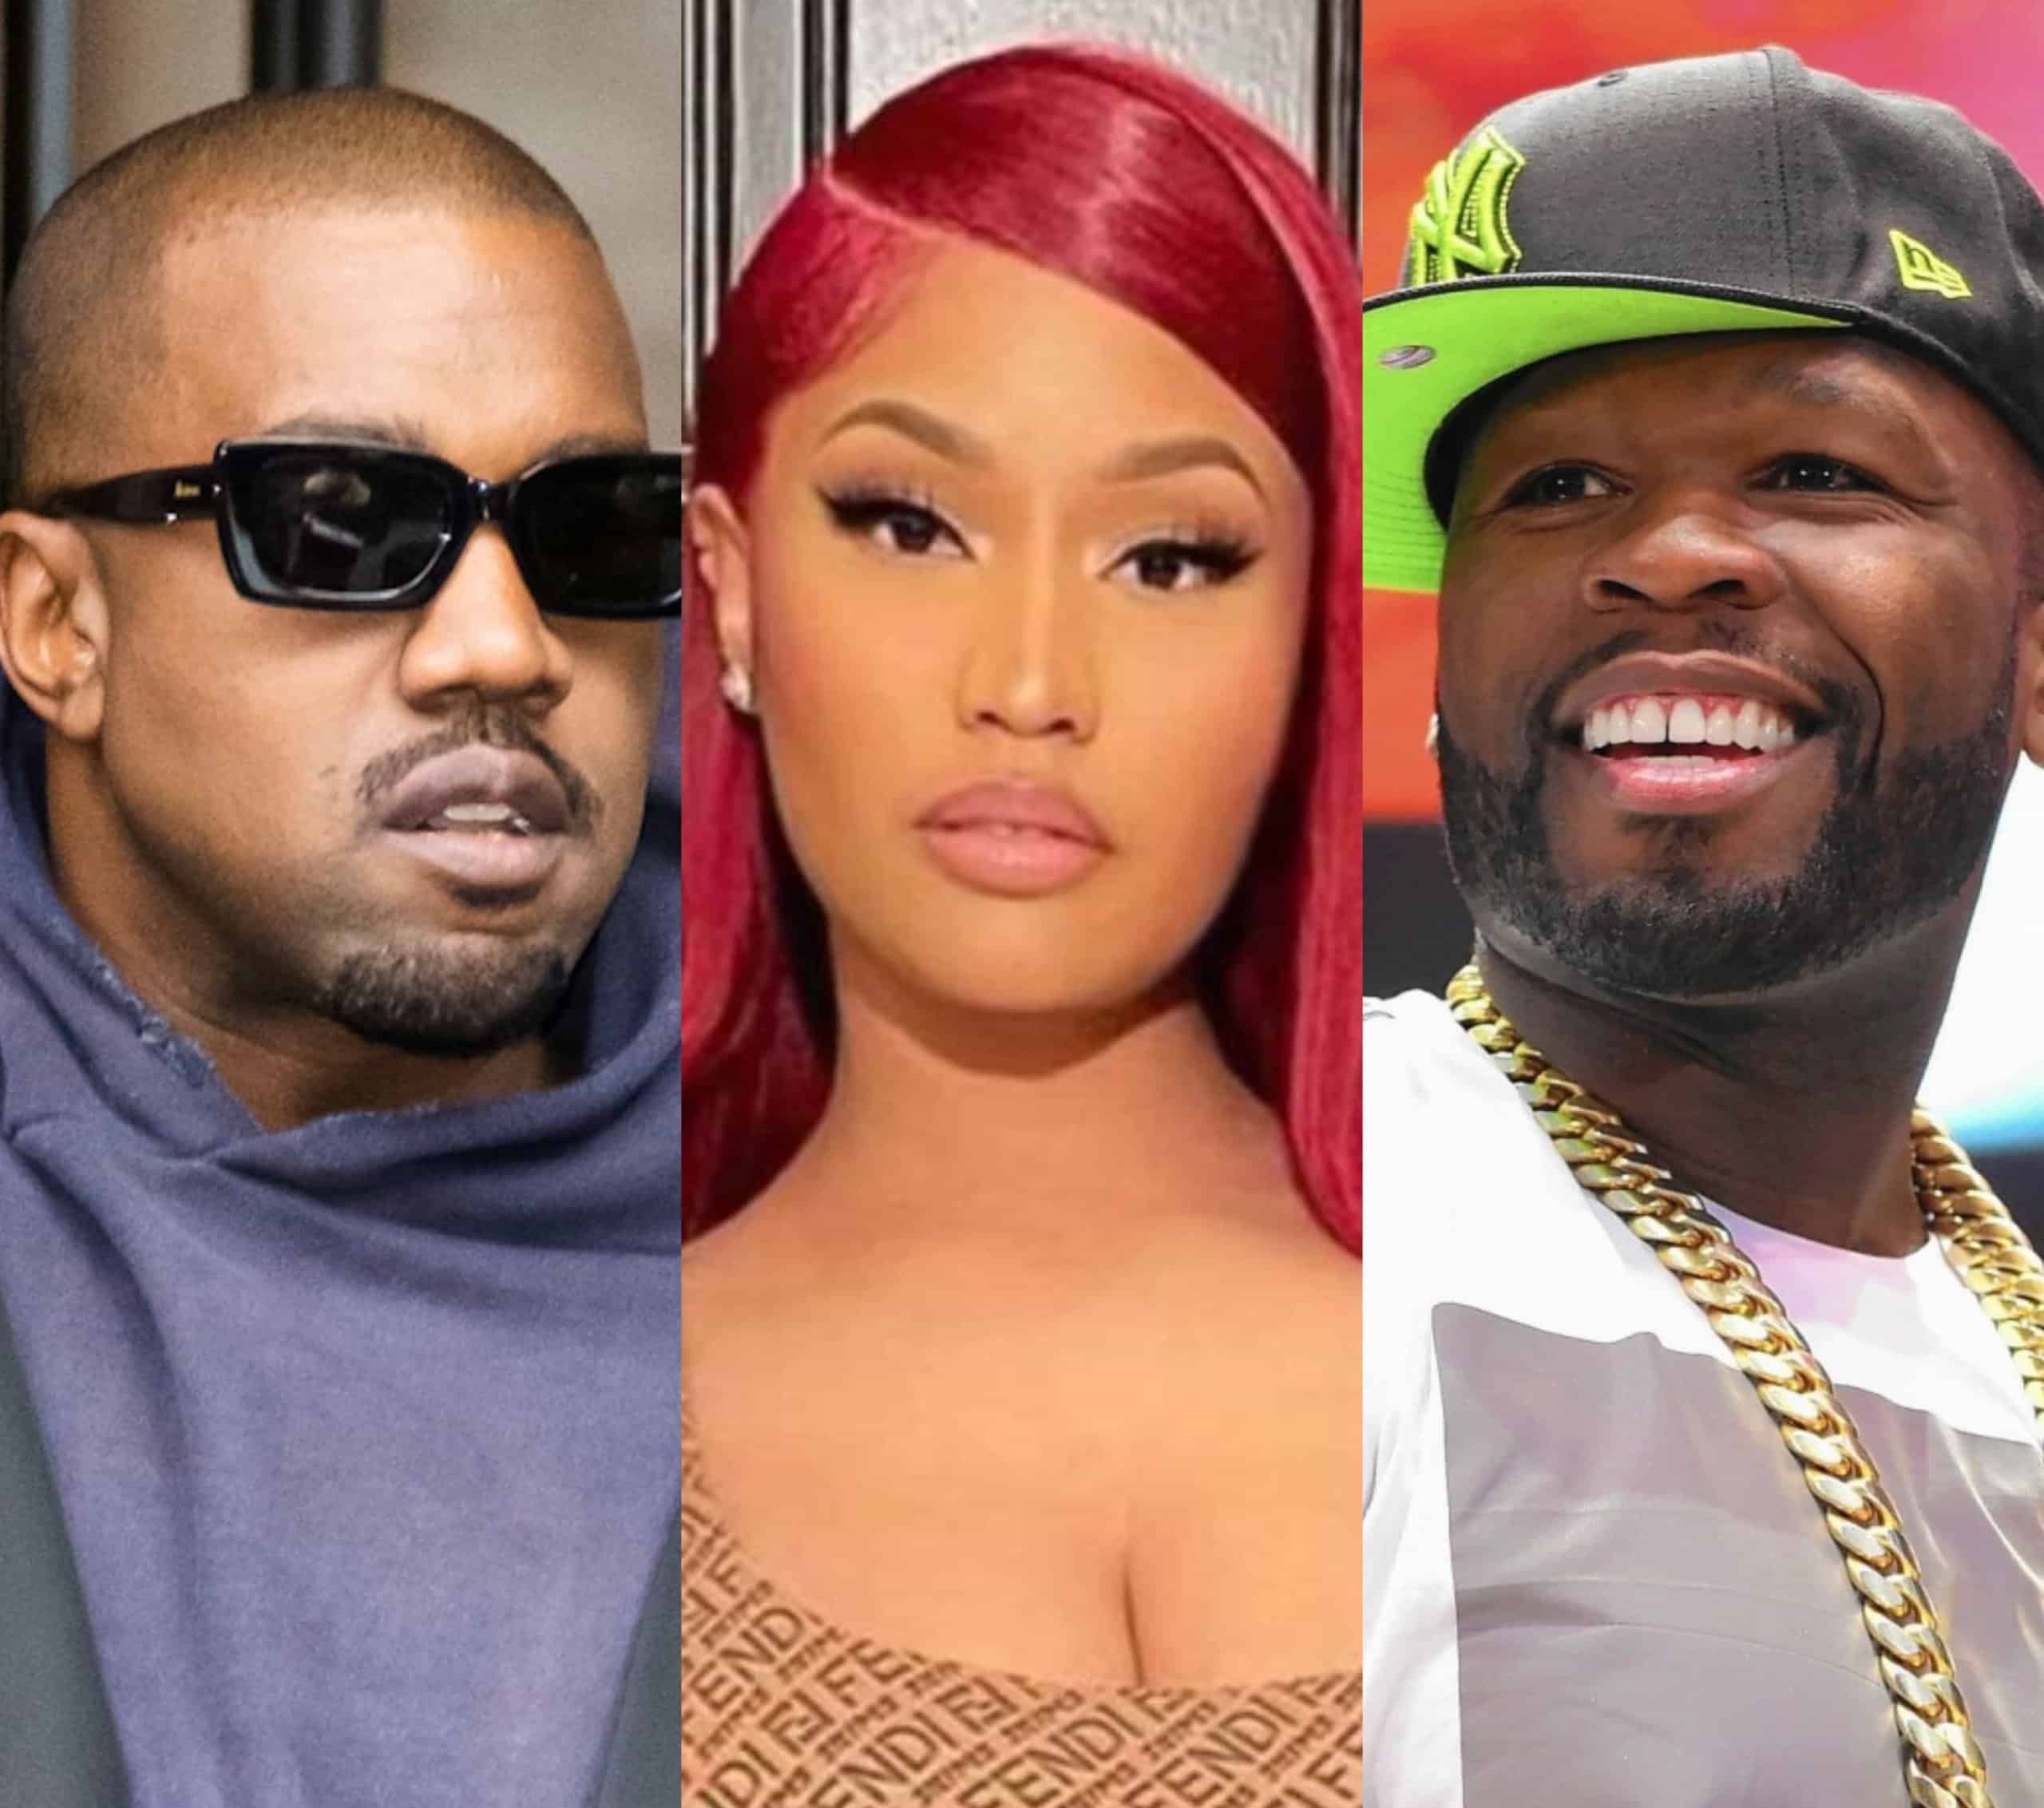 50 Cent & Kanye West Shouts Out Nicki Minaj For Success Of Her New Single